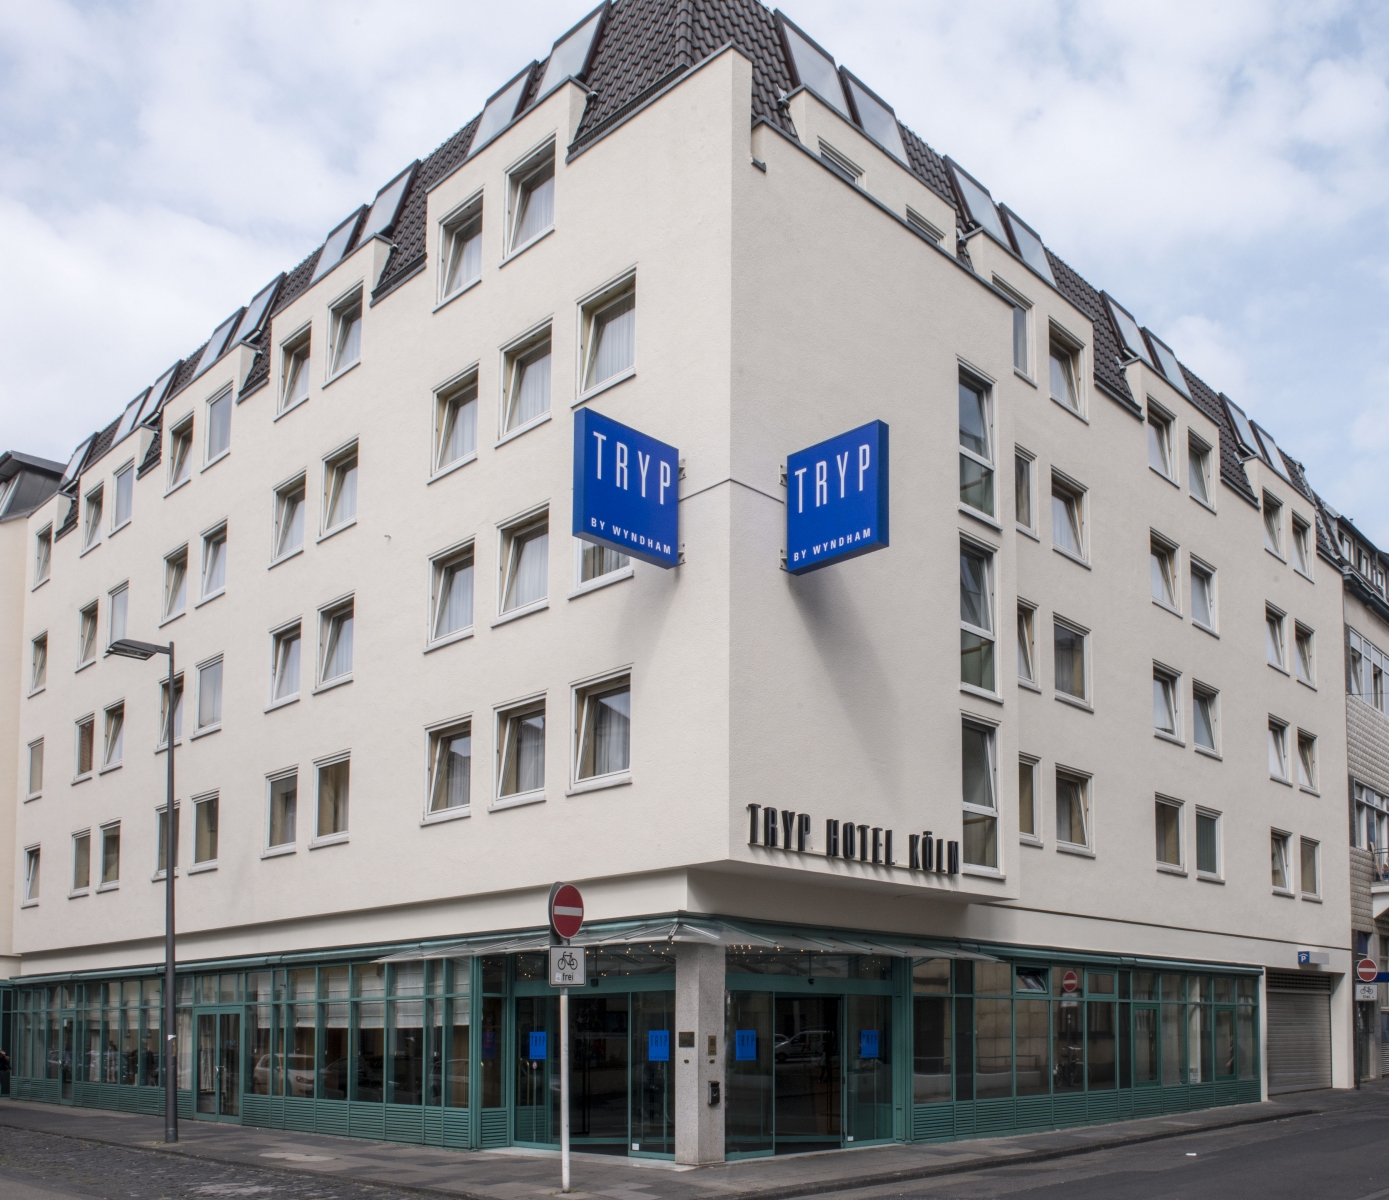 TRYP by Wyndham Köln City Centre <br/>62.90 ew <br/> <a href='http://vakantieoplossing.nl/outpage/?id=2989d15711dec57066683474cf599523' target='_blank'>View Details</a>